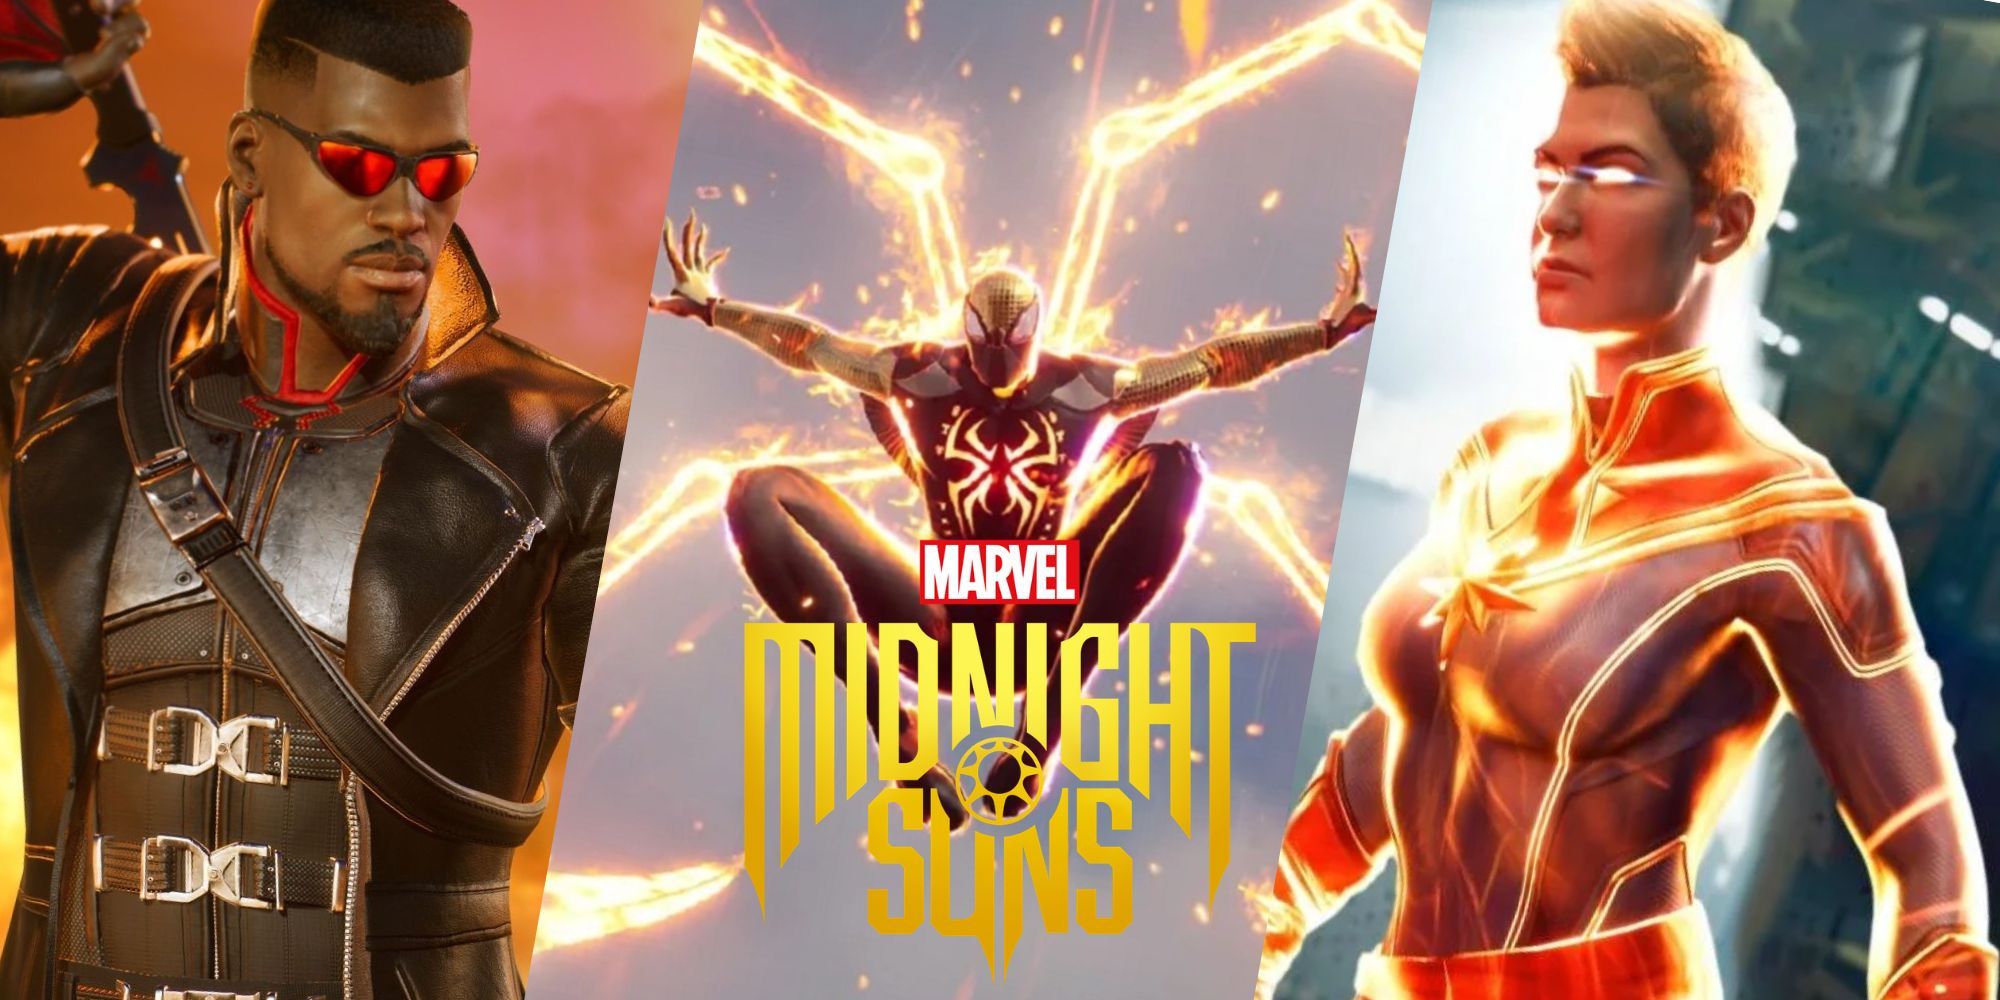 Blade, Spiderman and Captain Marvel are among the highest damage heroes in Marvel's Midnight Suns